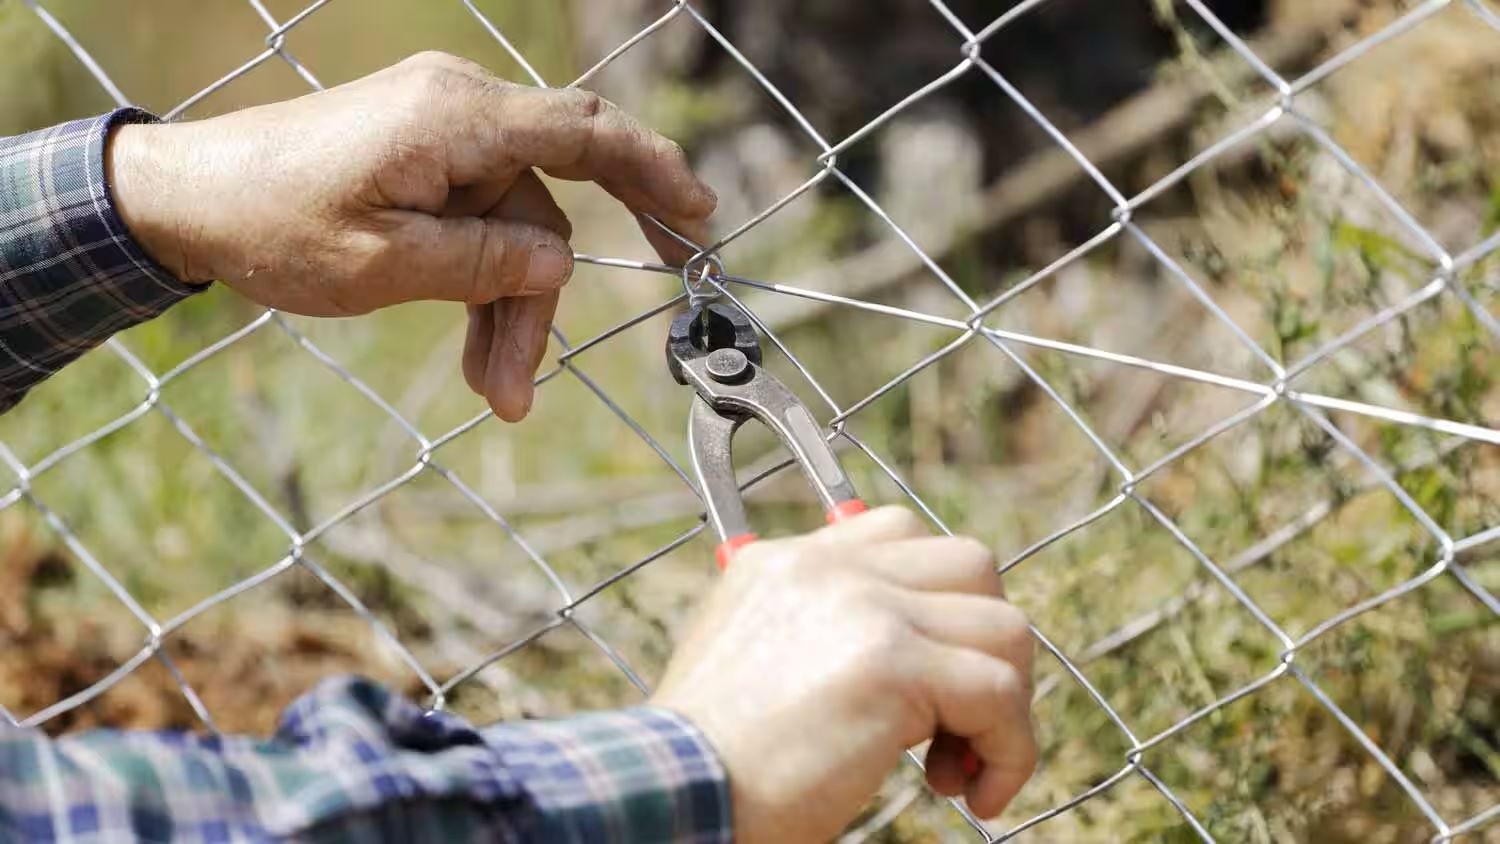 How To Fix Chain Link Fence